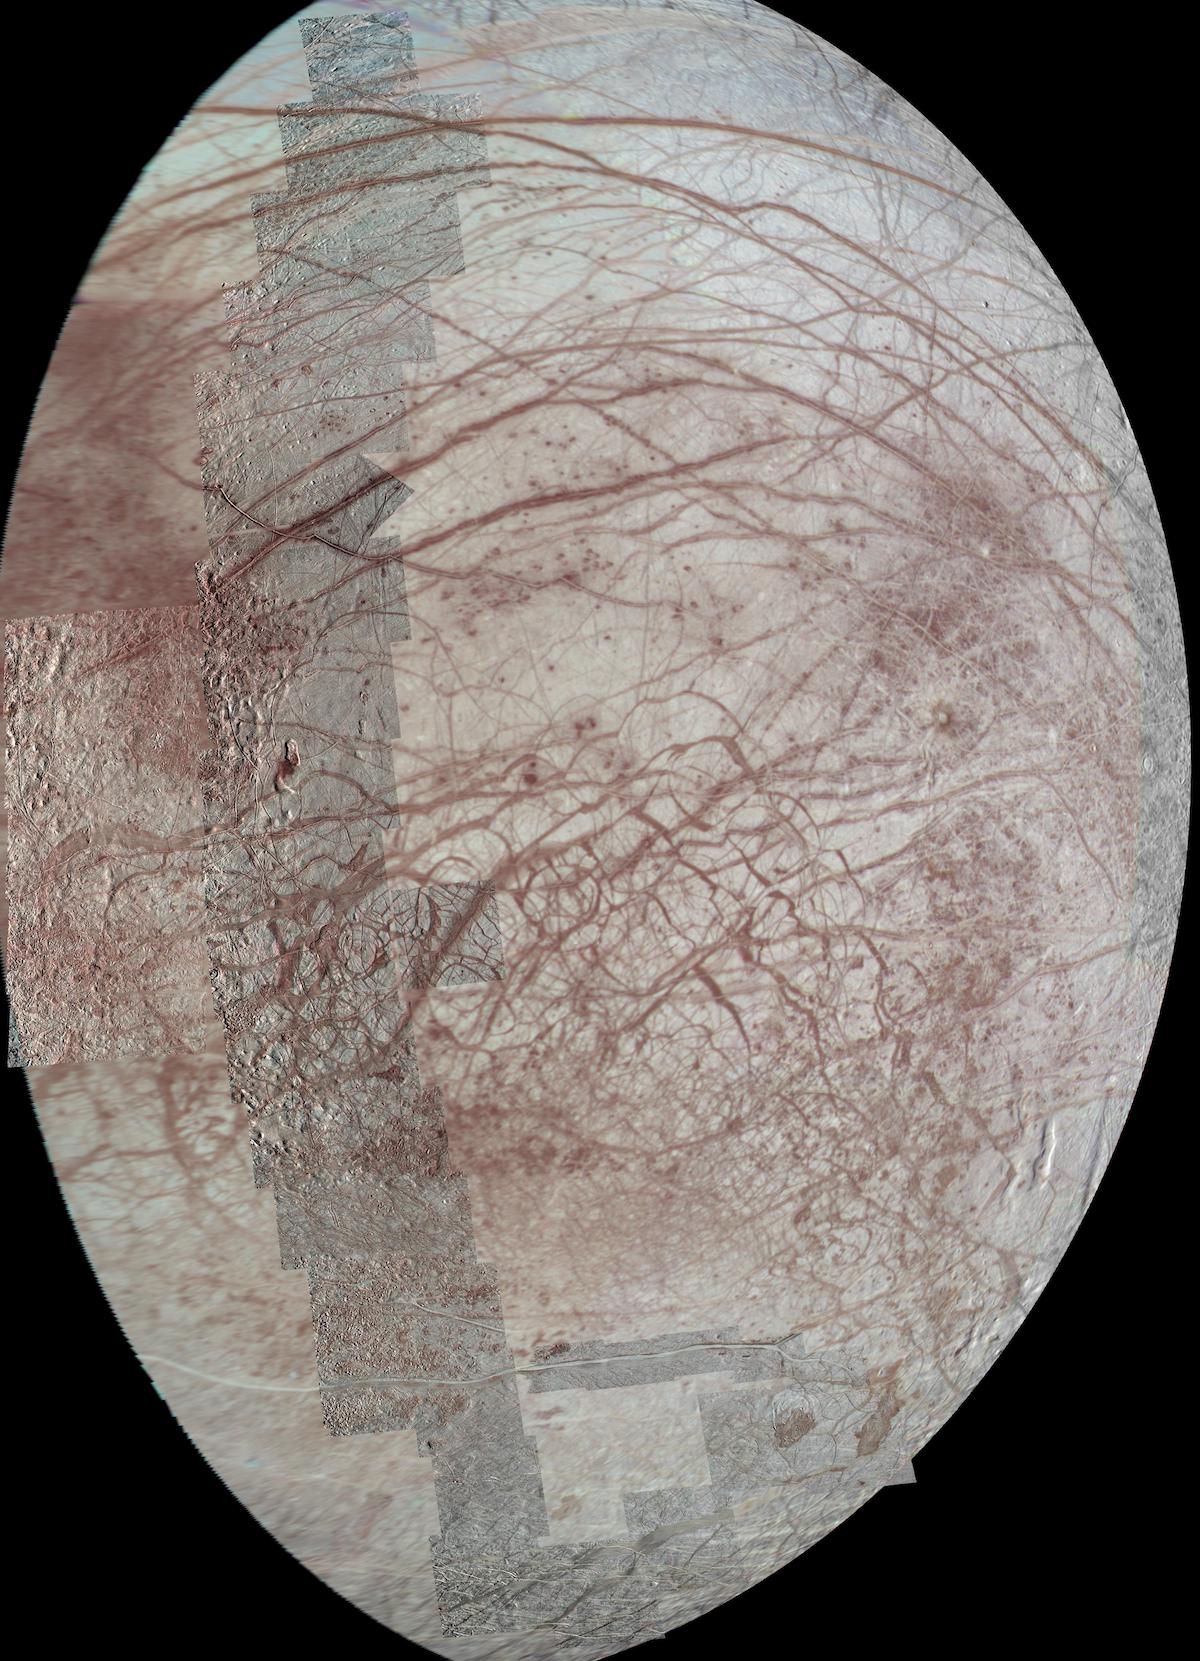 high-resolution color images of terrain superimposed over a lower-resolution view of about half of Europa's surface